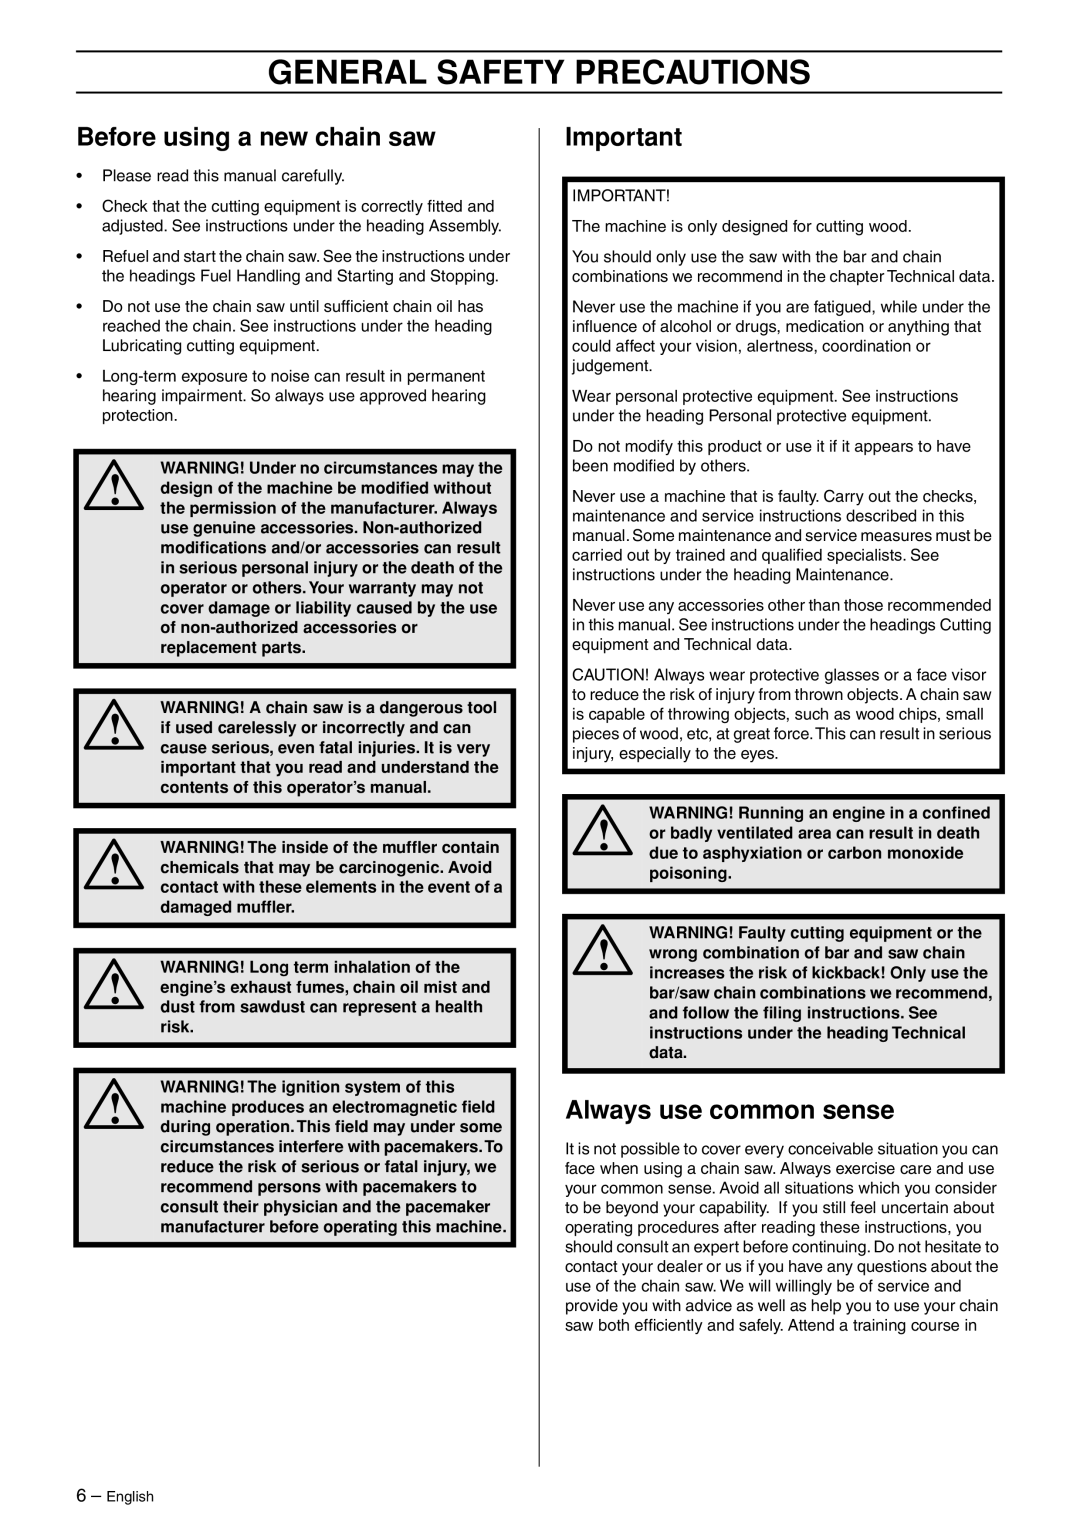 Jonsered CS 2135T manual General Safety Precautions, Before using a new chain saw, Always use common sense 